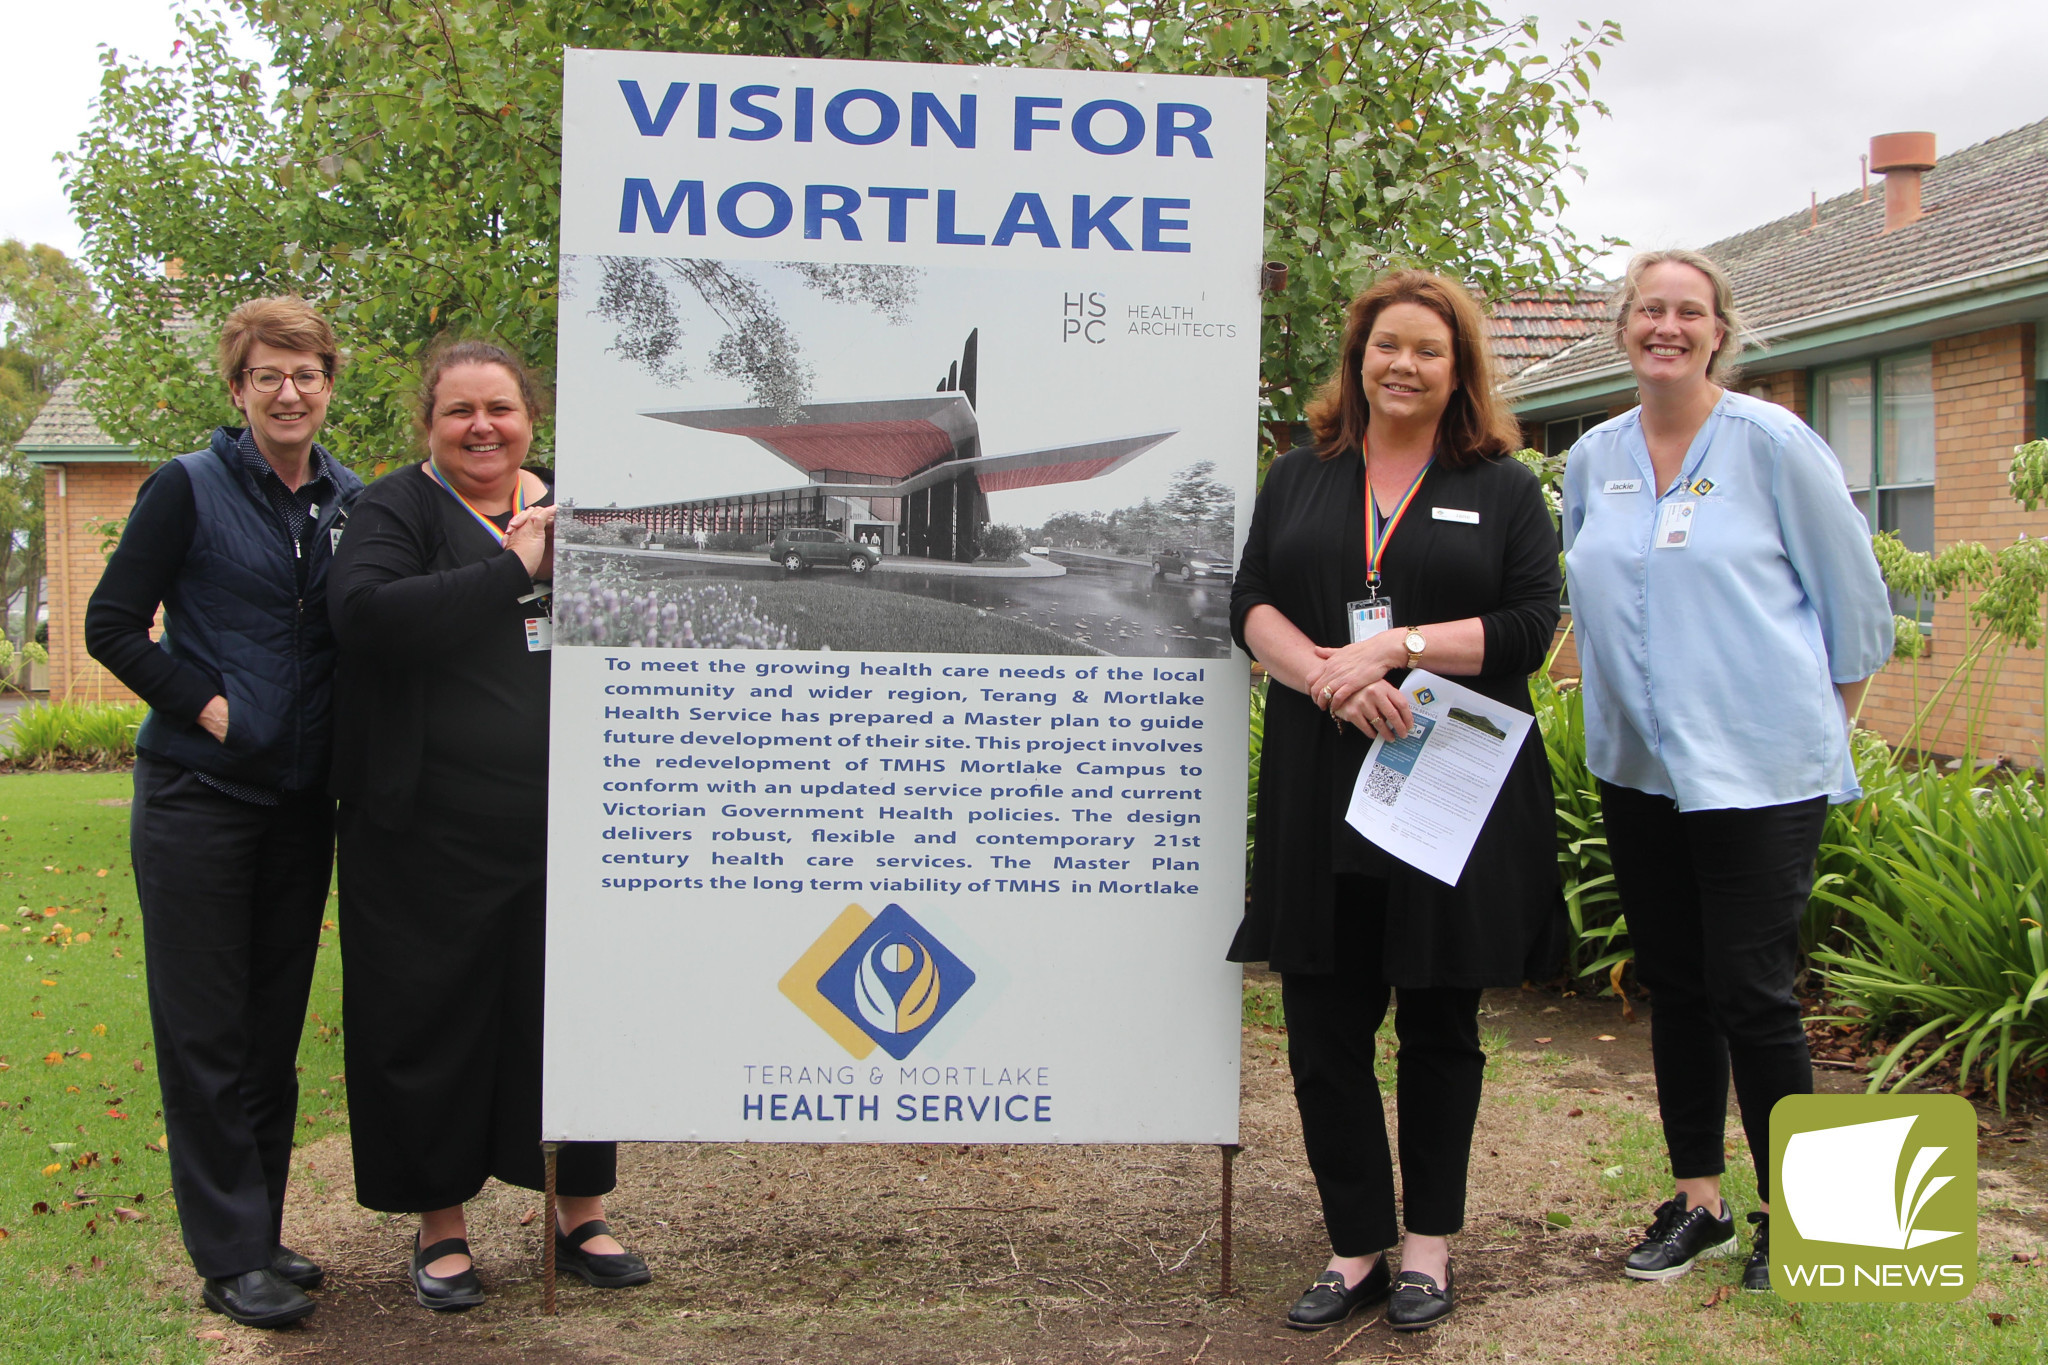 Still waiting: The Mortlake community has again missed out on funding for a major infrastructure project after Terang and Mortlake Health Service was informed the long-awaited redevelopment of the Mortlake Community Health Centre would not be delivered for at least another year.